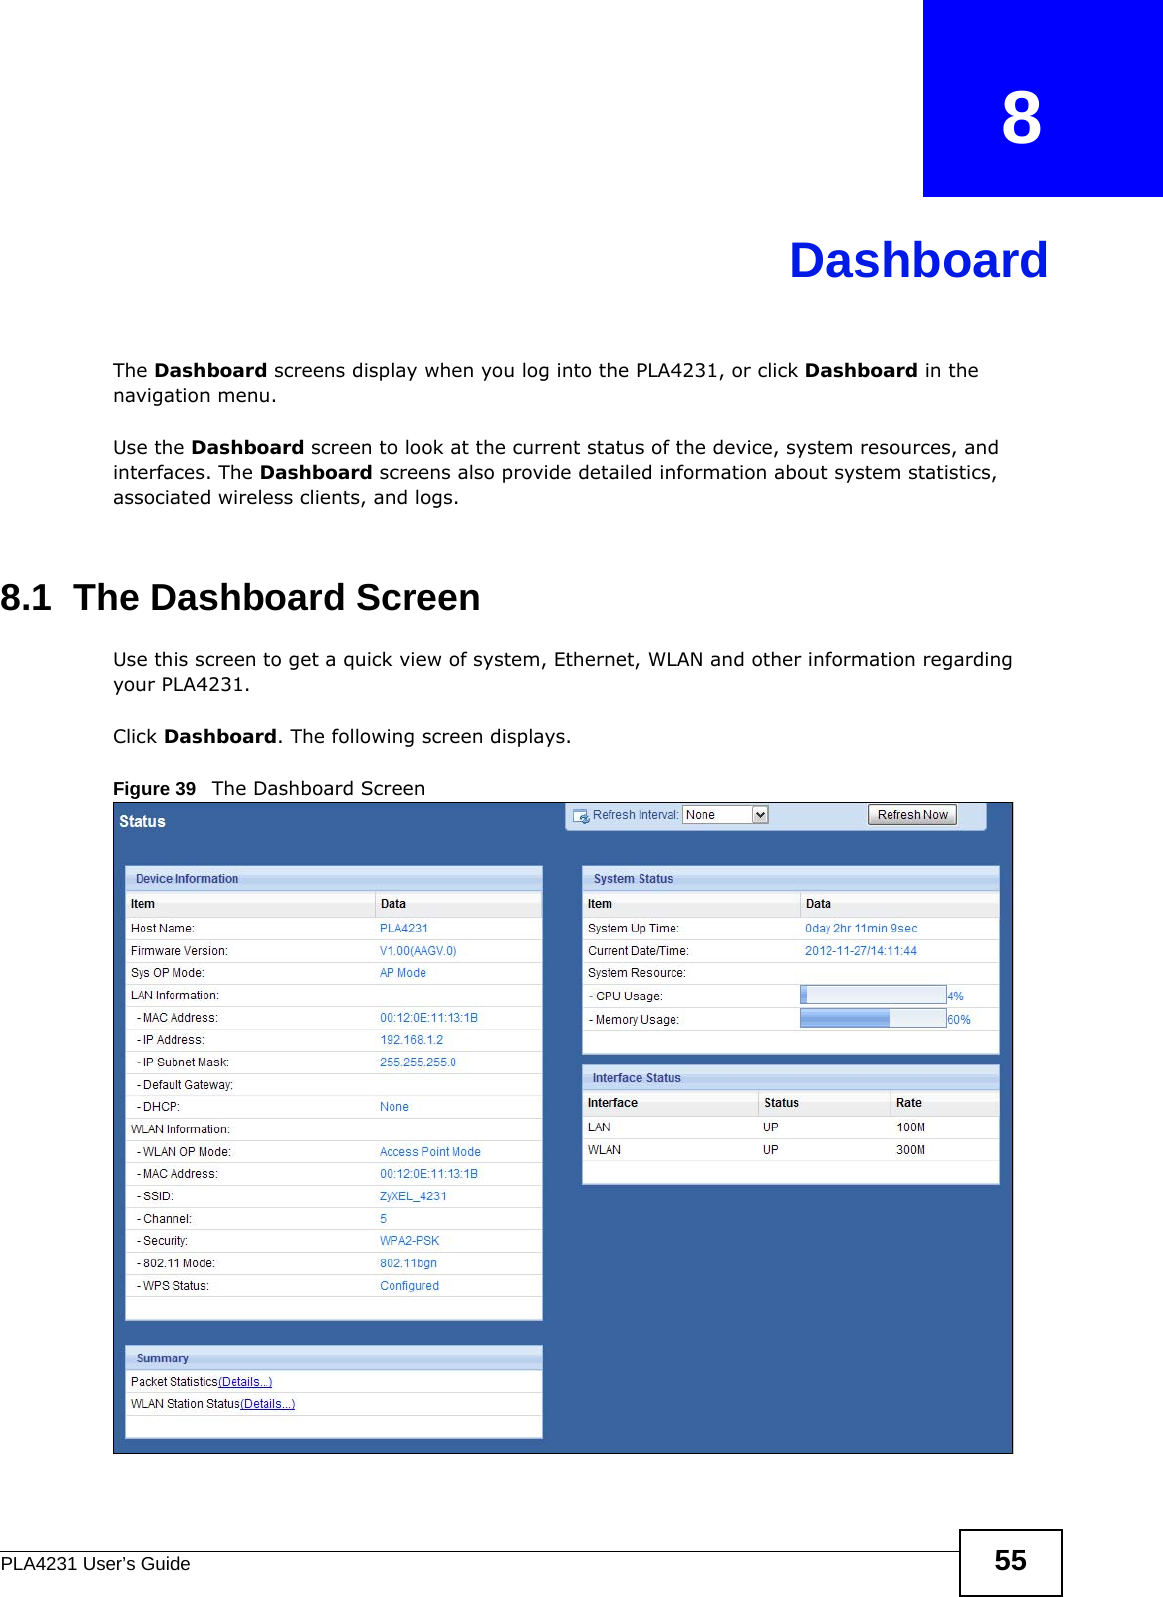 PLA4231 User’s Guide 55CHAPTER   8DashboardThe Dashboard screens display when you log into the PLA4231, or click Dashboard in the navigation menu.Use the Dashboard screen to look at the current status of the device, system resources, and interfaces. The Dashboard screens also provide detailed information about system statistics, associated wireless clients, and logs.8.1  The Dashboard ScreenUse this screen to get a quick view of system, Ethernet, WLAN and other information regarding your PLA4231. Click Dashboard. The following screen displays.Figure 39   The Dashboard Screen 